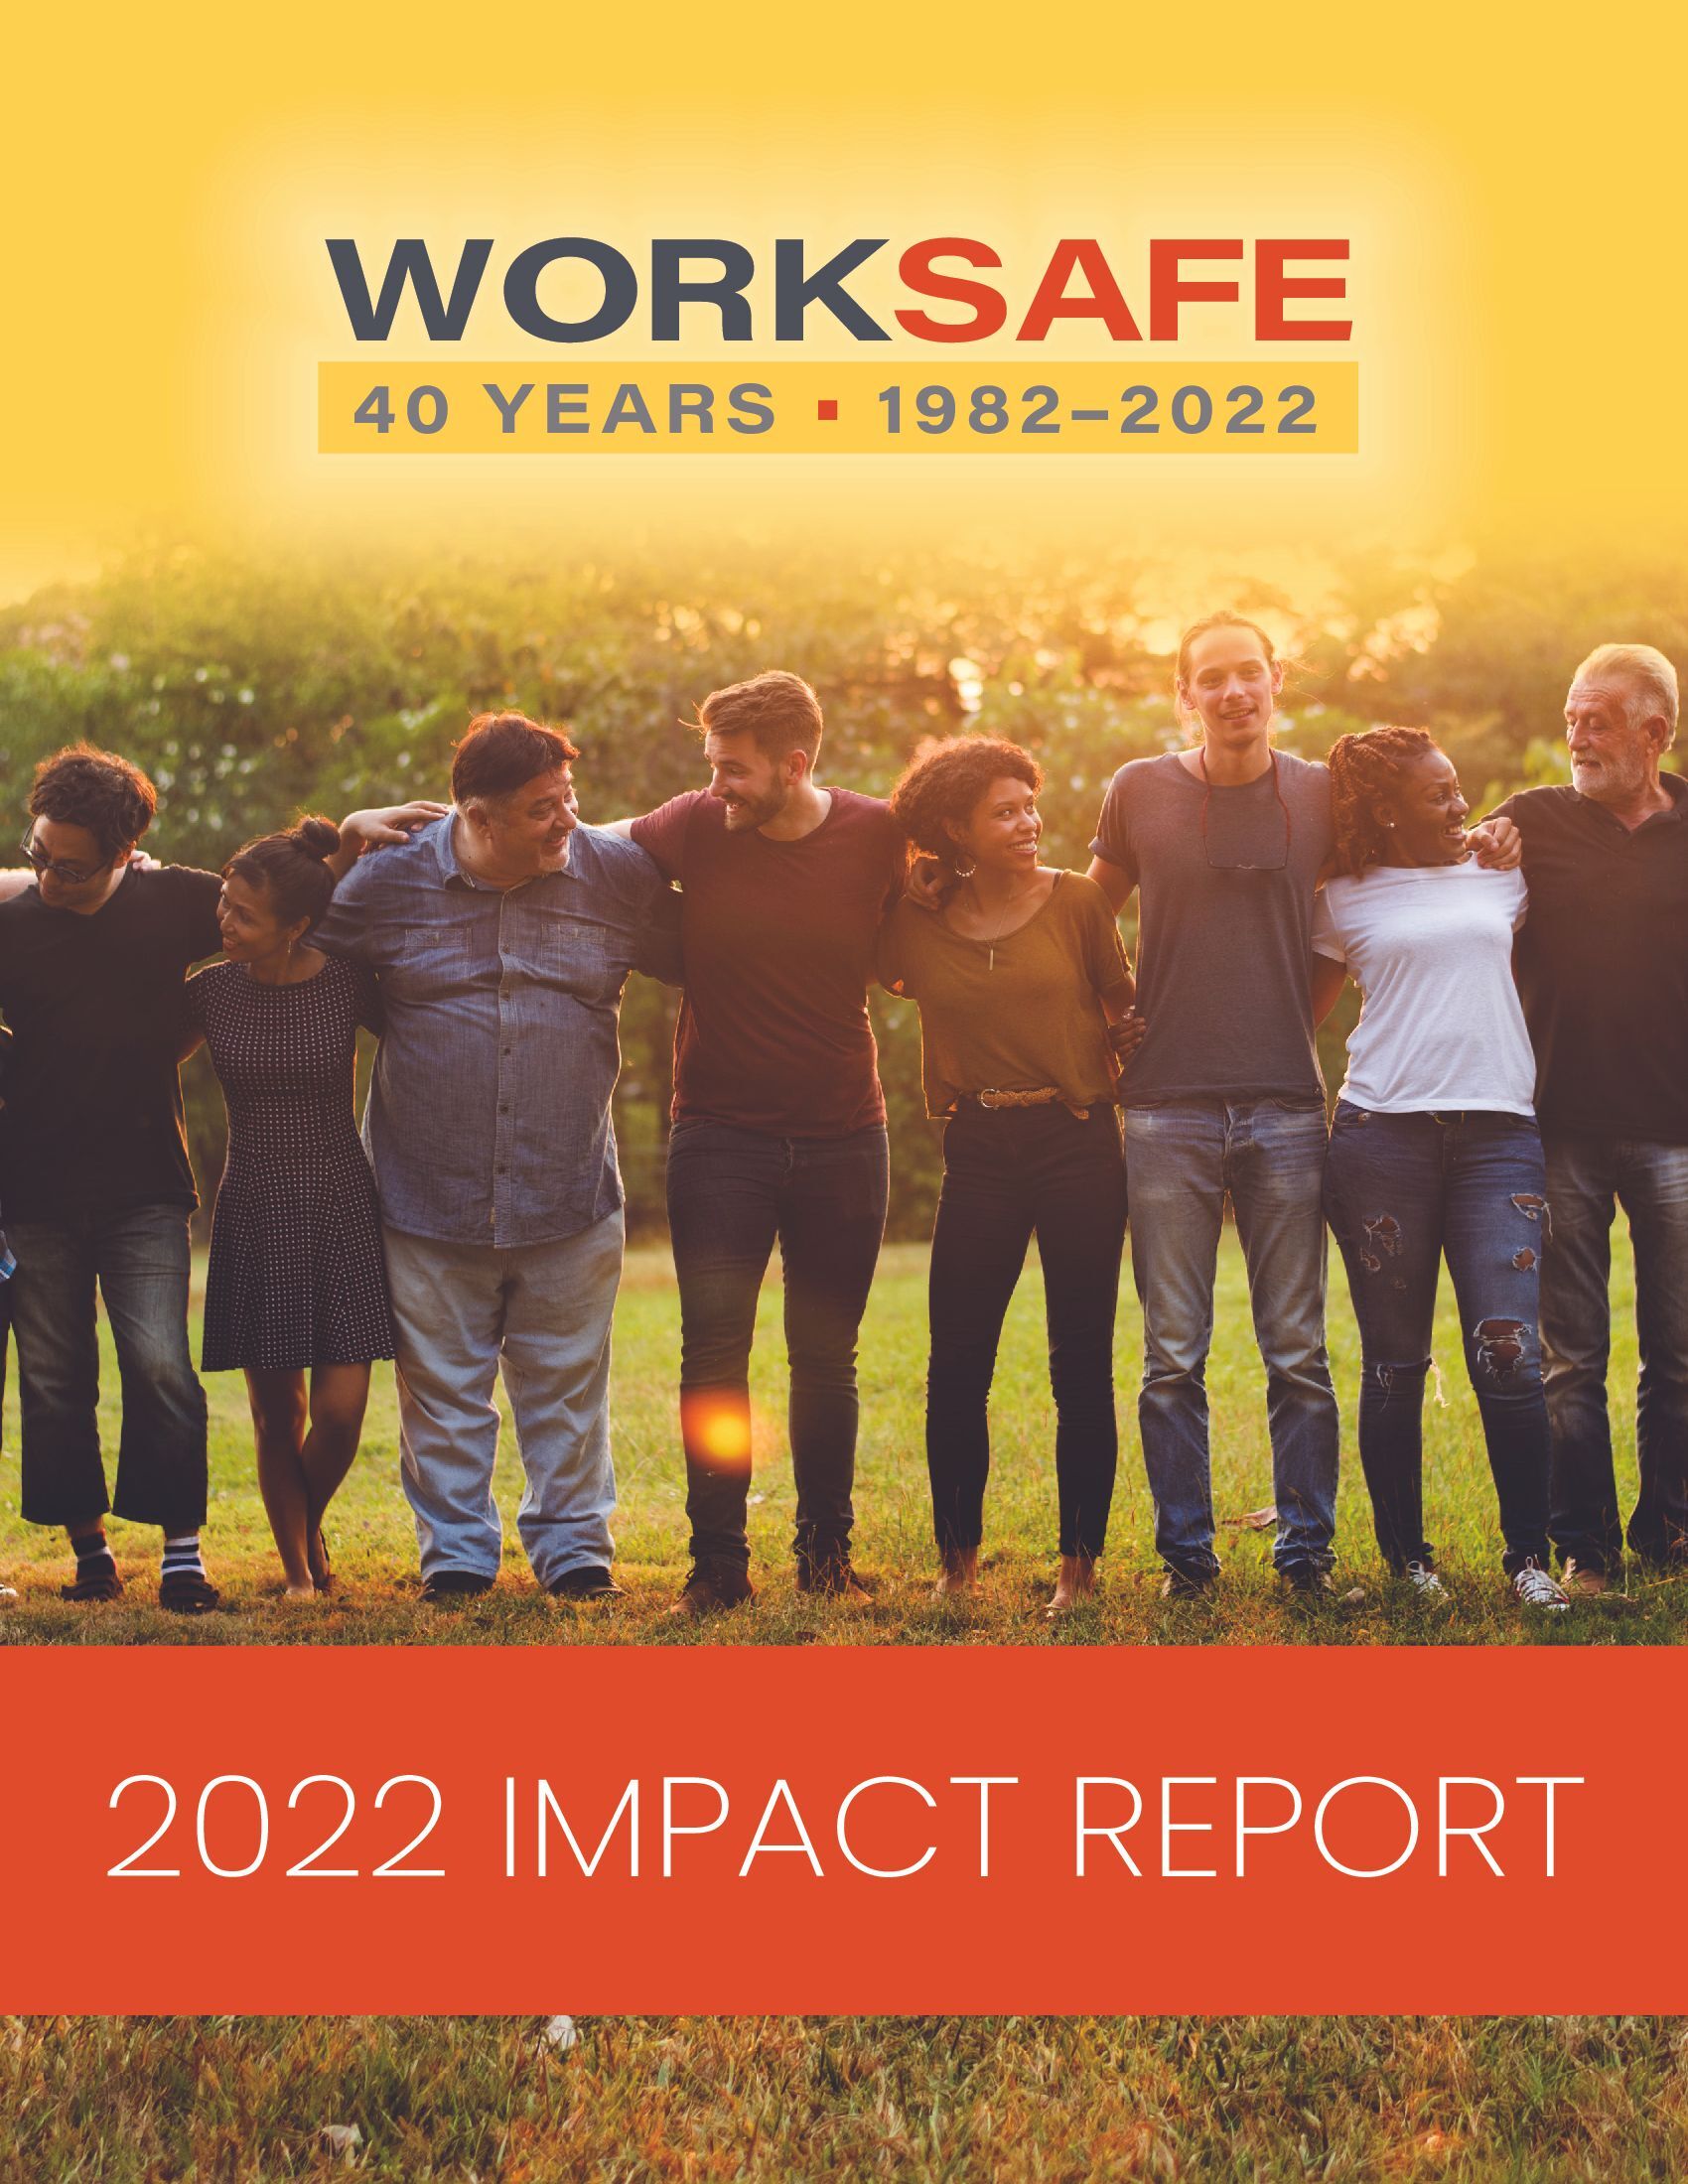 Our 2022 Impact Report is Out!